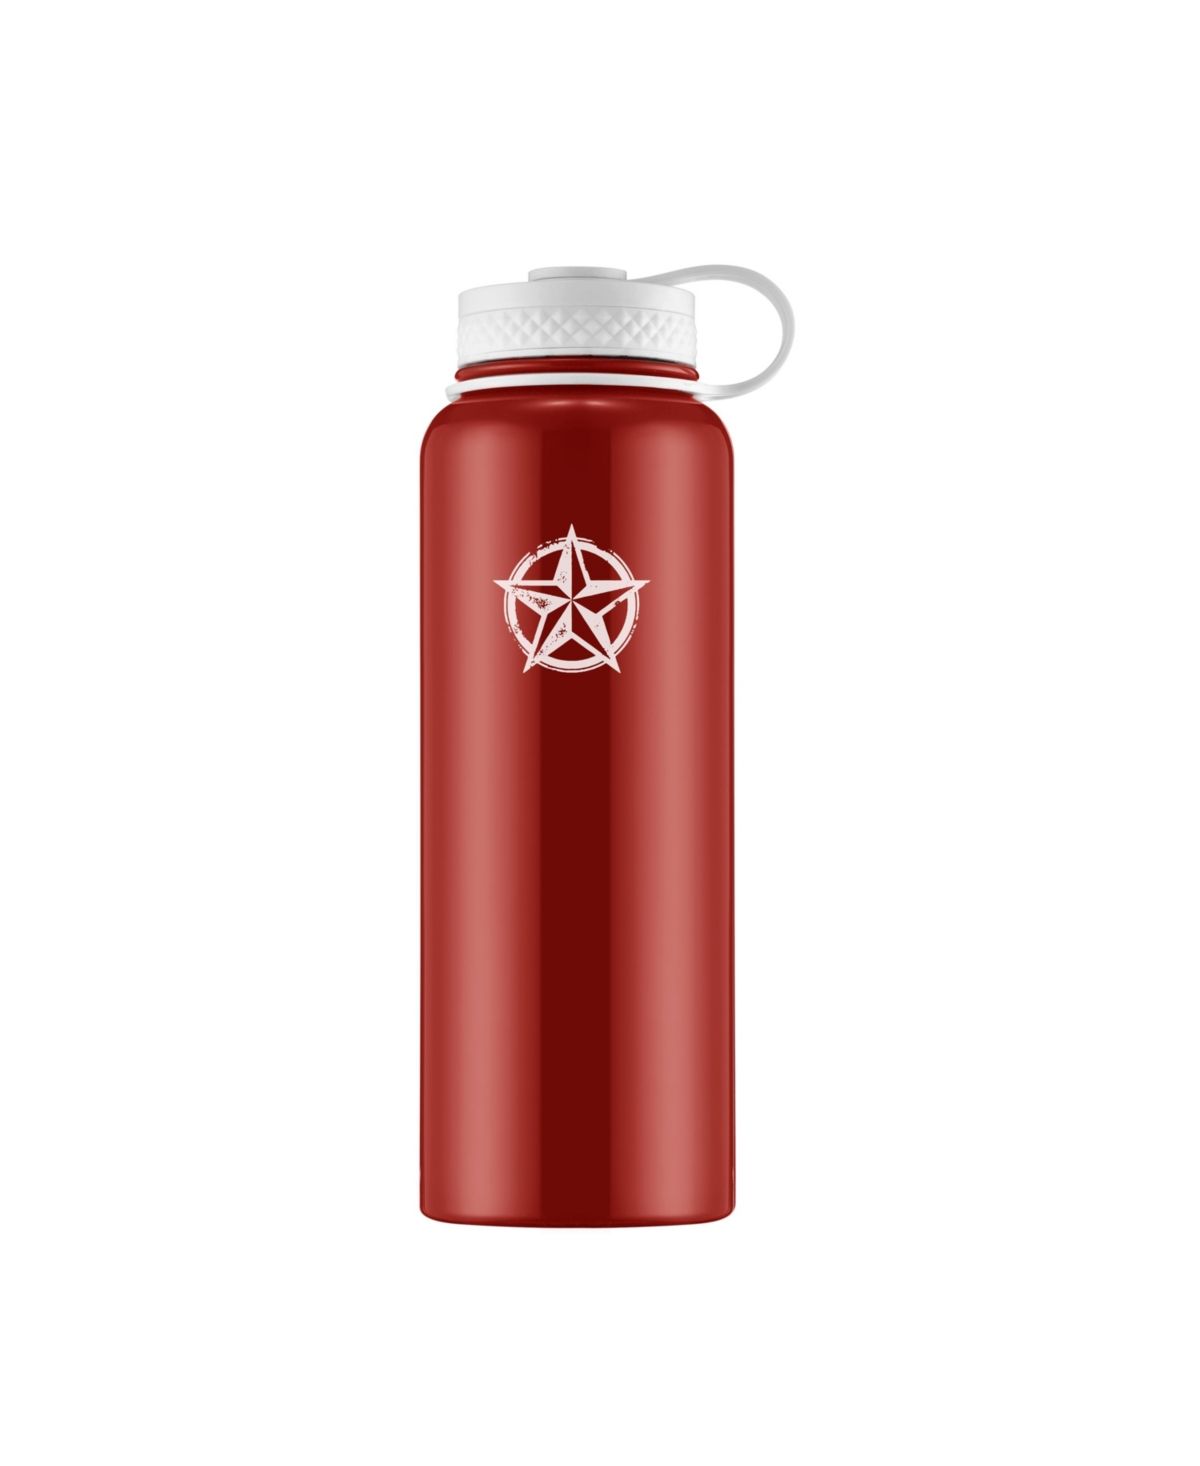 Thirstystone by Cambridge 40 oz Red Water Bottle with Star Decal | Macys (US)